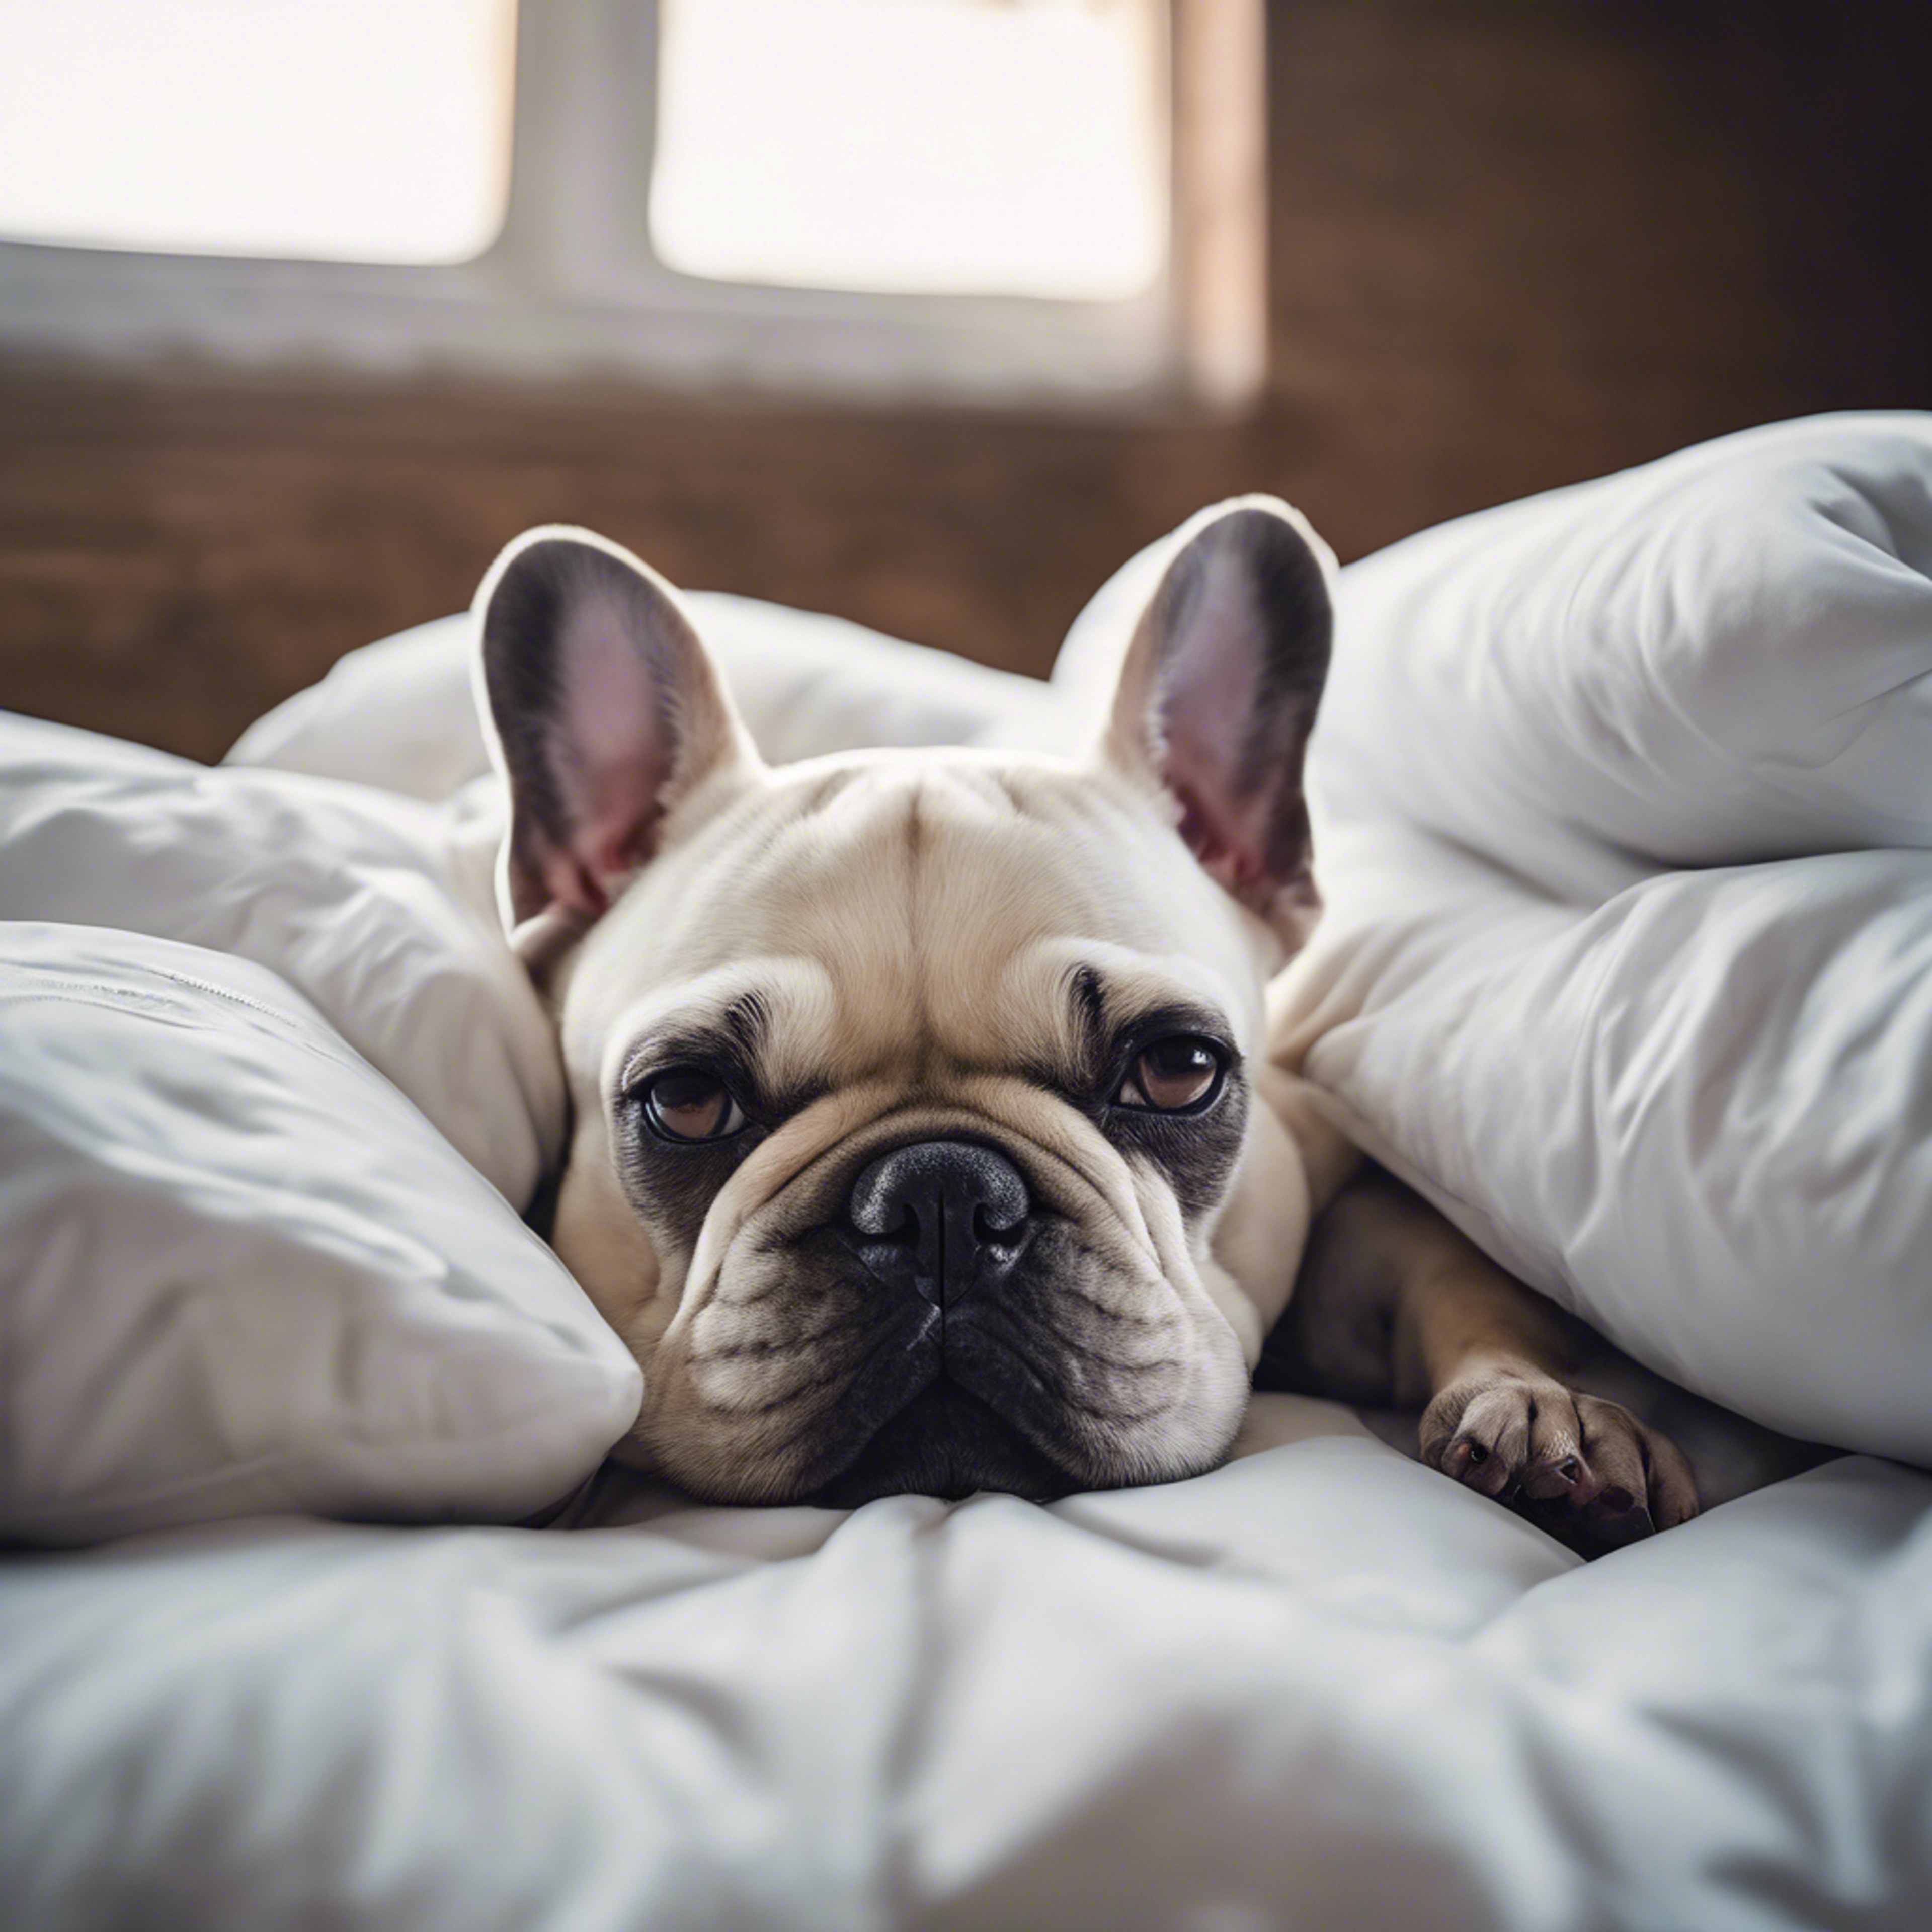 A young French Bulldog falling into a deep sleep, nestled into a pile of comfy pillows on a king-size bed. Hình nền[35e5ea00e17d41afbf2f]